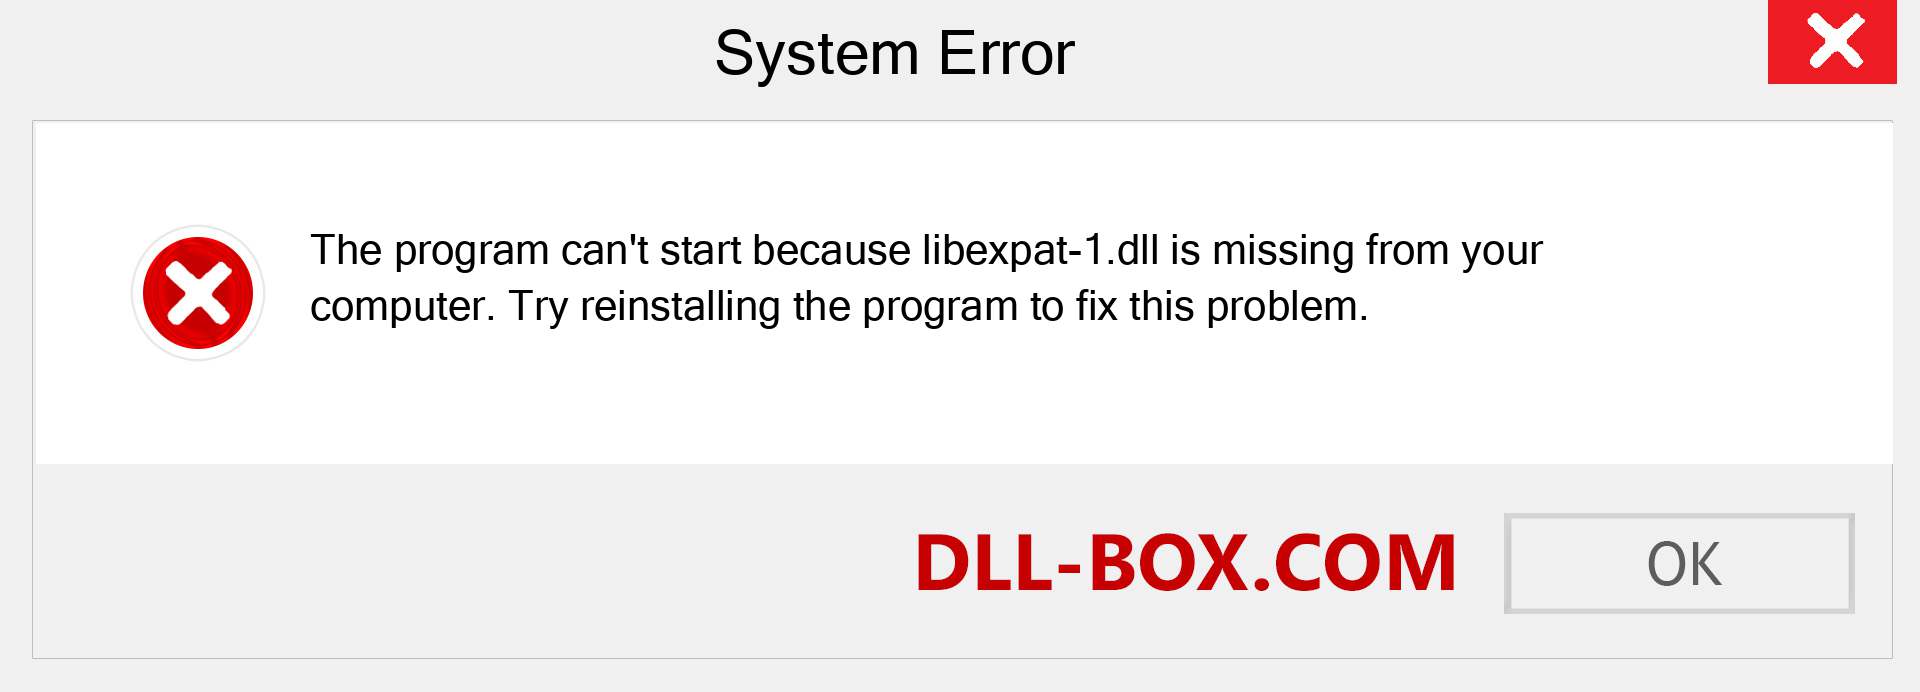  libexpat-1.dll file is missing?. Download for Windows 7, 8, 10 - Fix  libexpat-1 dll Missing Error on Windows, photos, images